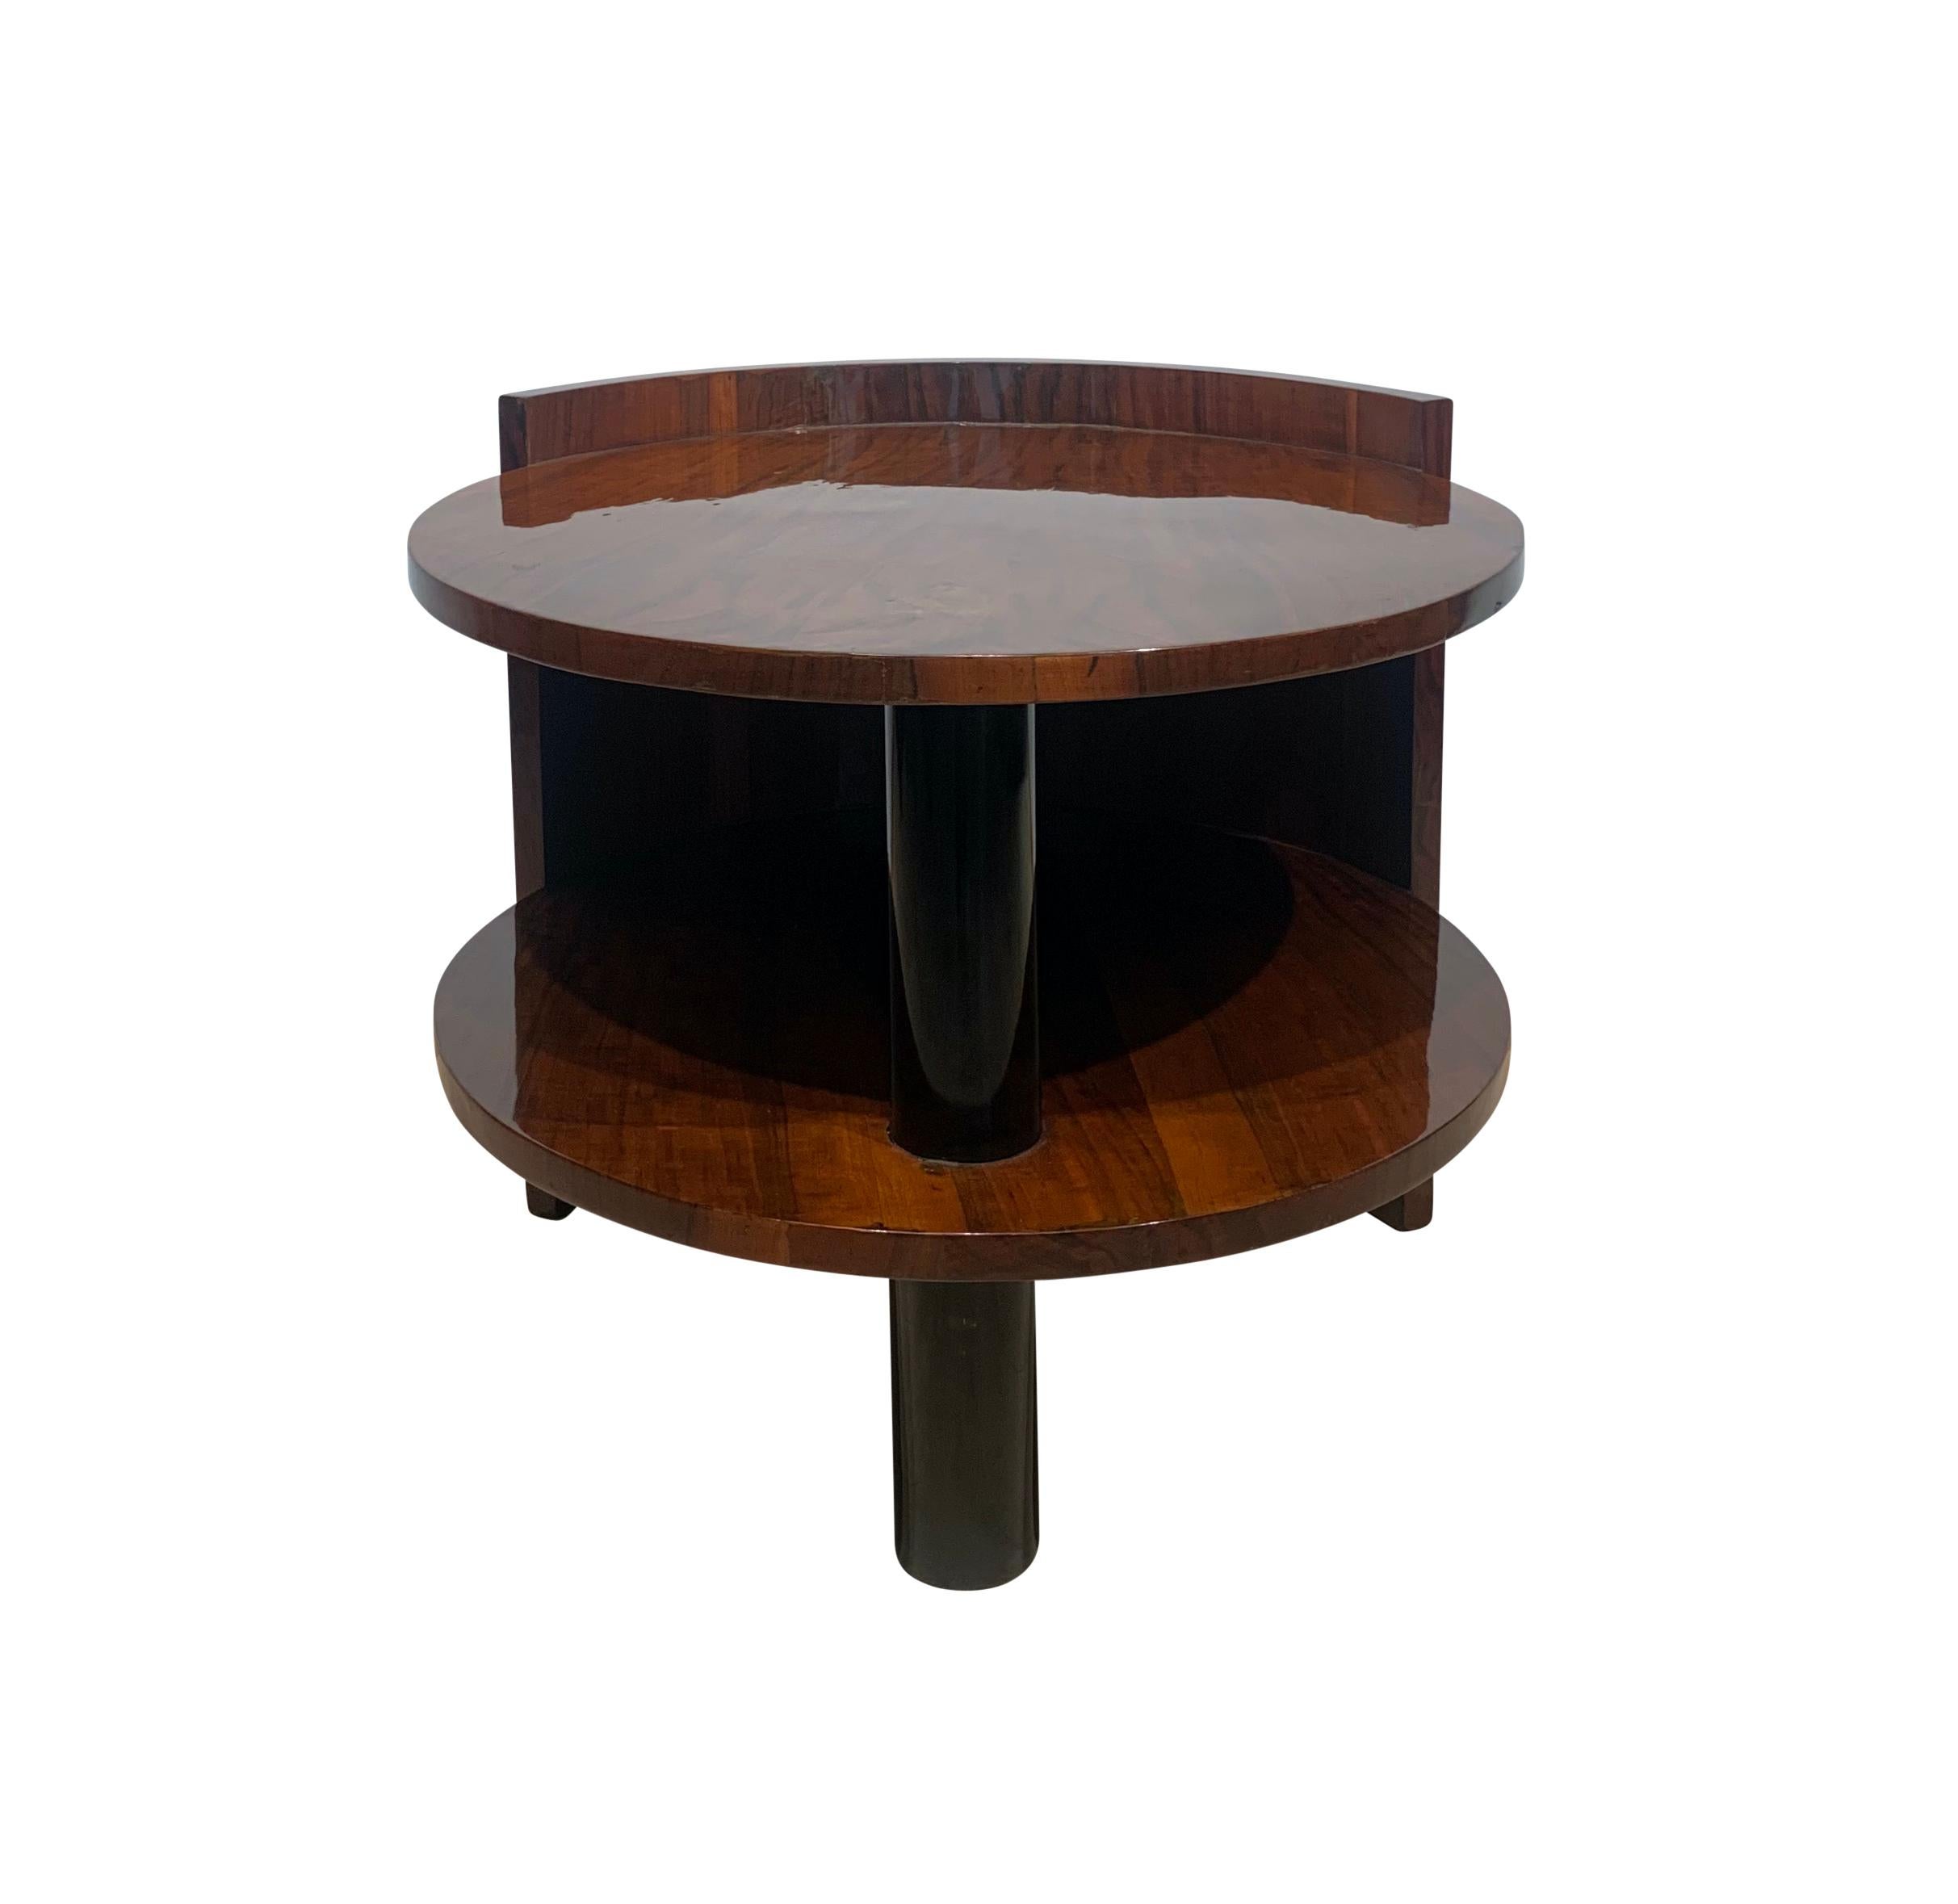 Large, round Art Deco sofa or coffee table from France around 1930.
* Elegant design
* Walnut veneered on softwood
* Restored and hand polished shellac
* Ebonized columns 
* Top with black glass plate
Dimensions: 
* H 65/60 cm, Ø 75 cm
* H 25.6“ /